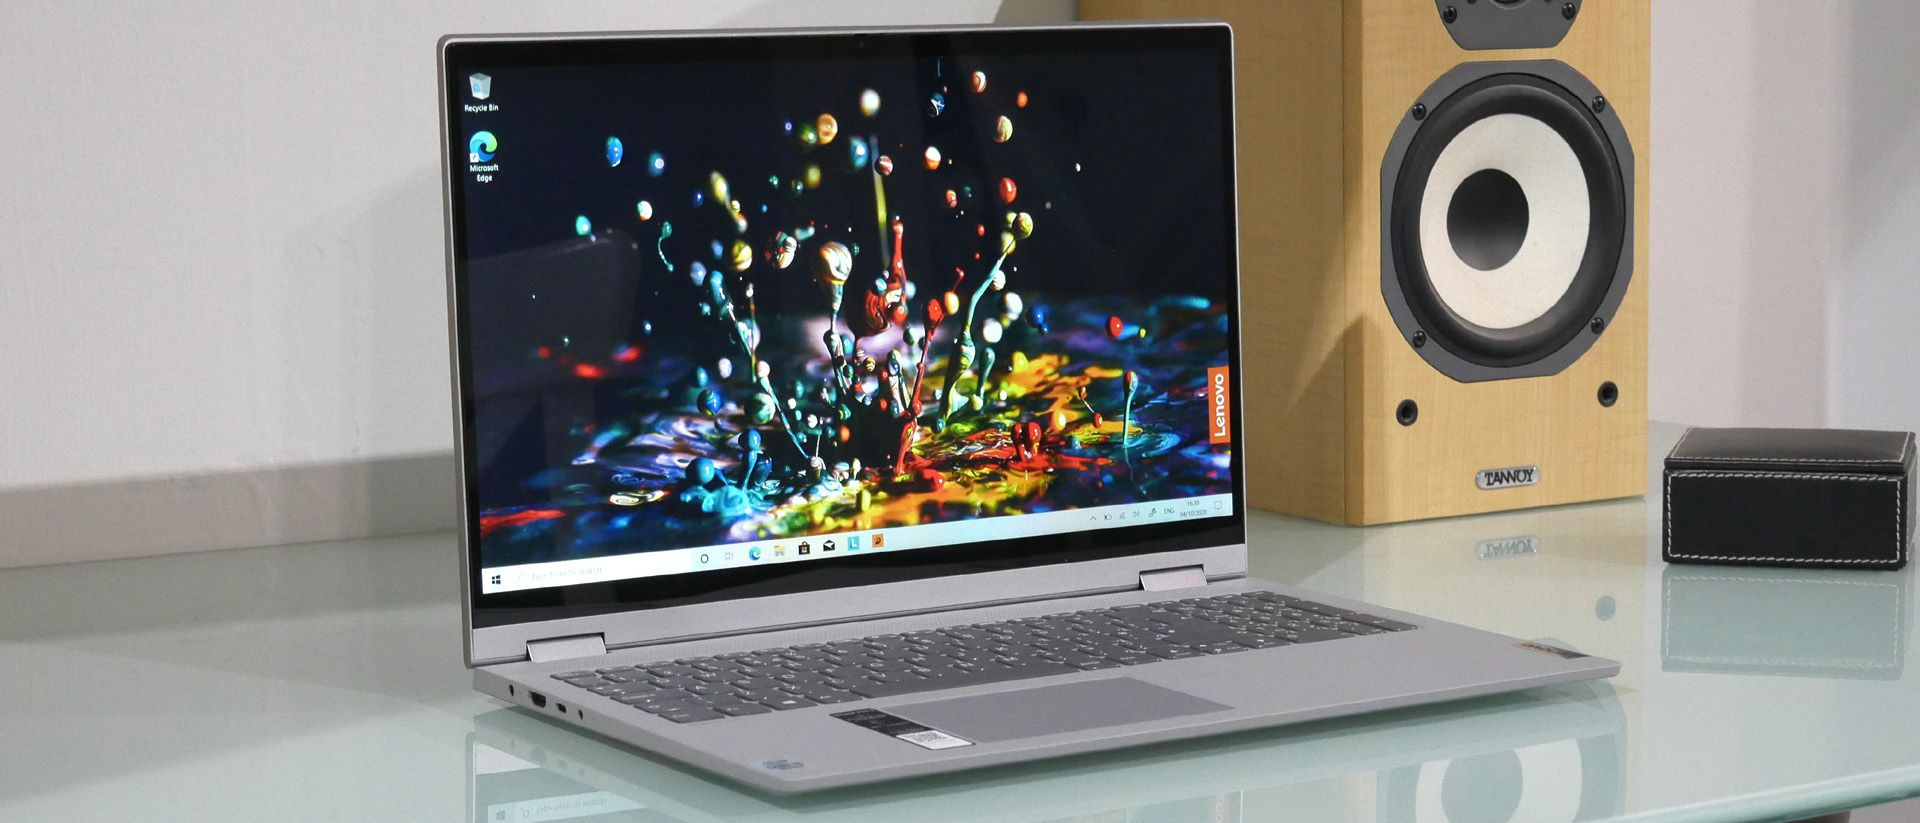 Top 5 Best Budget Gaming Laptops in India (May 2022)